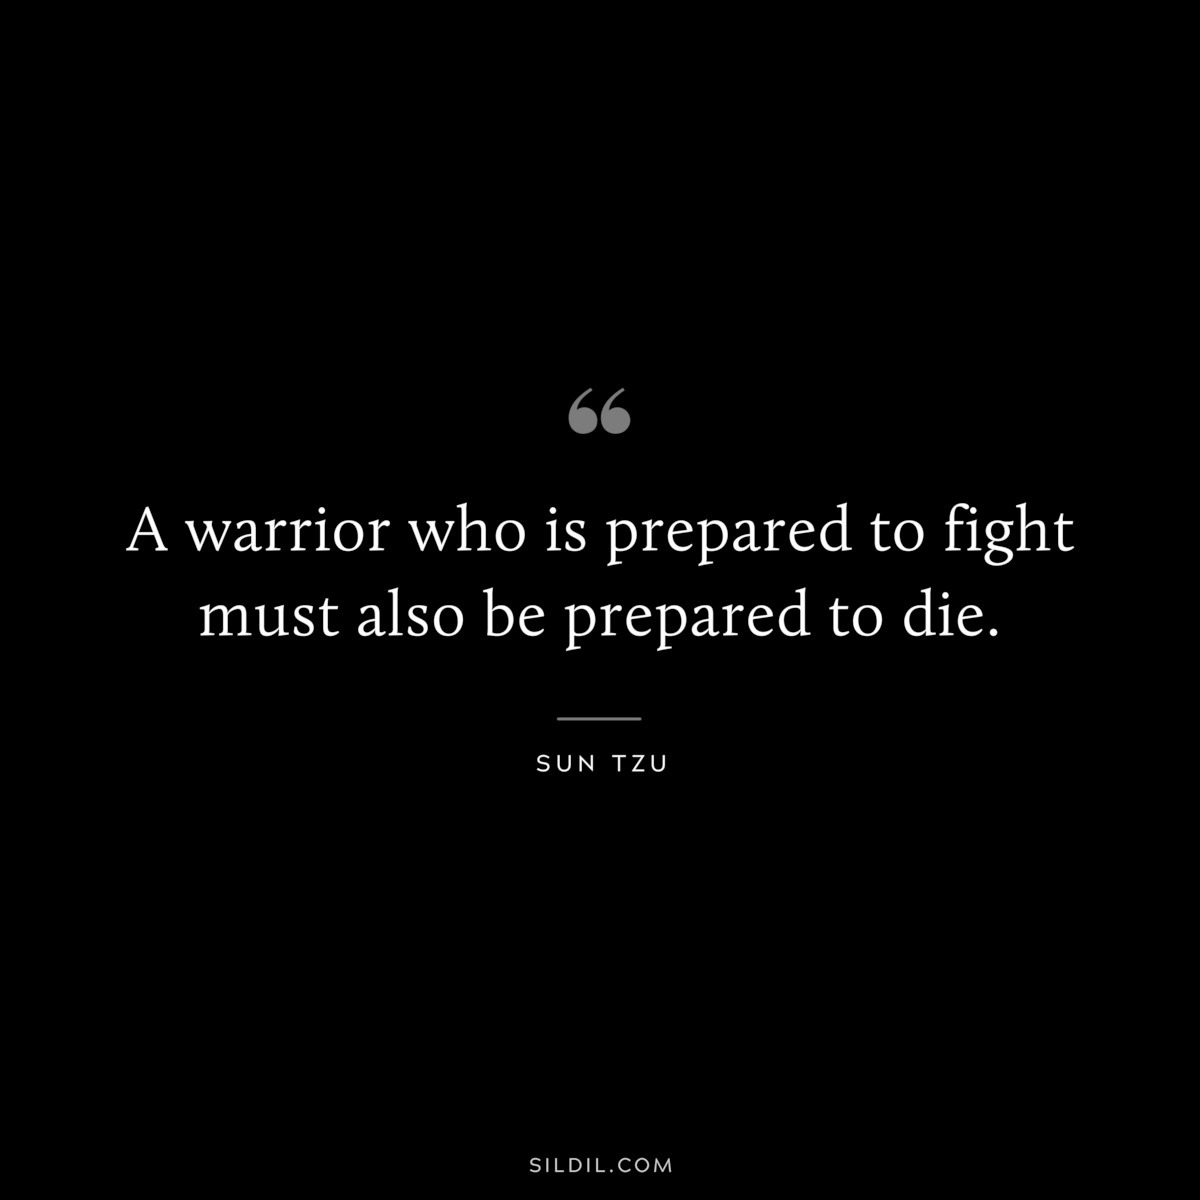 A warrior who is prepared to fight must also be prepared to die.― Sun Tzu